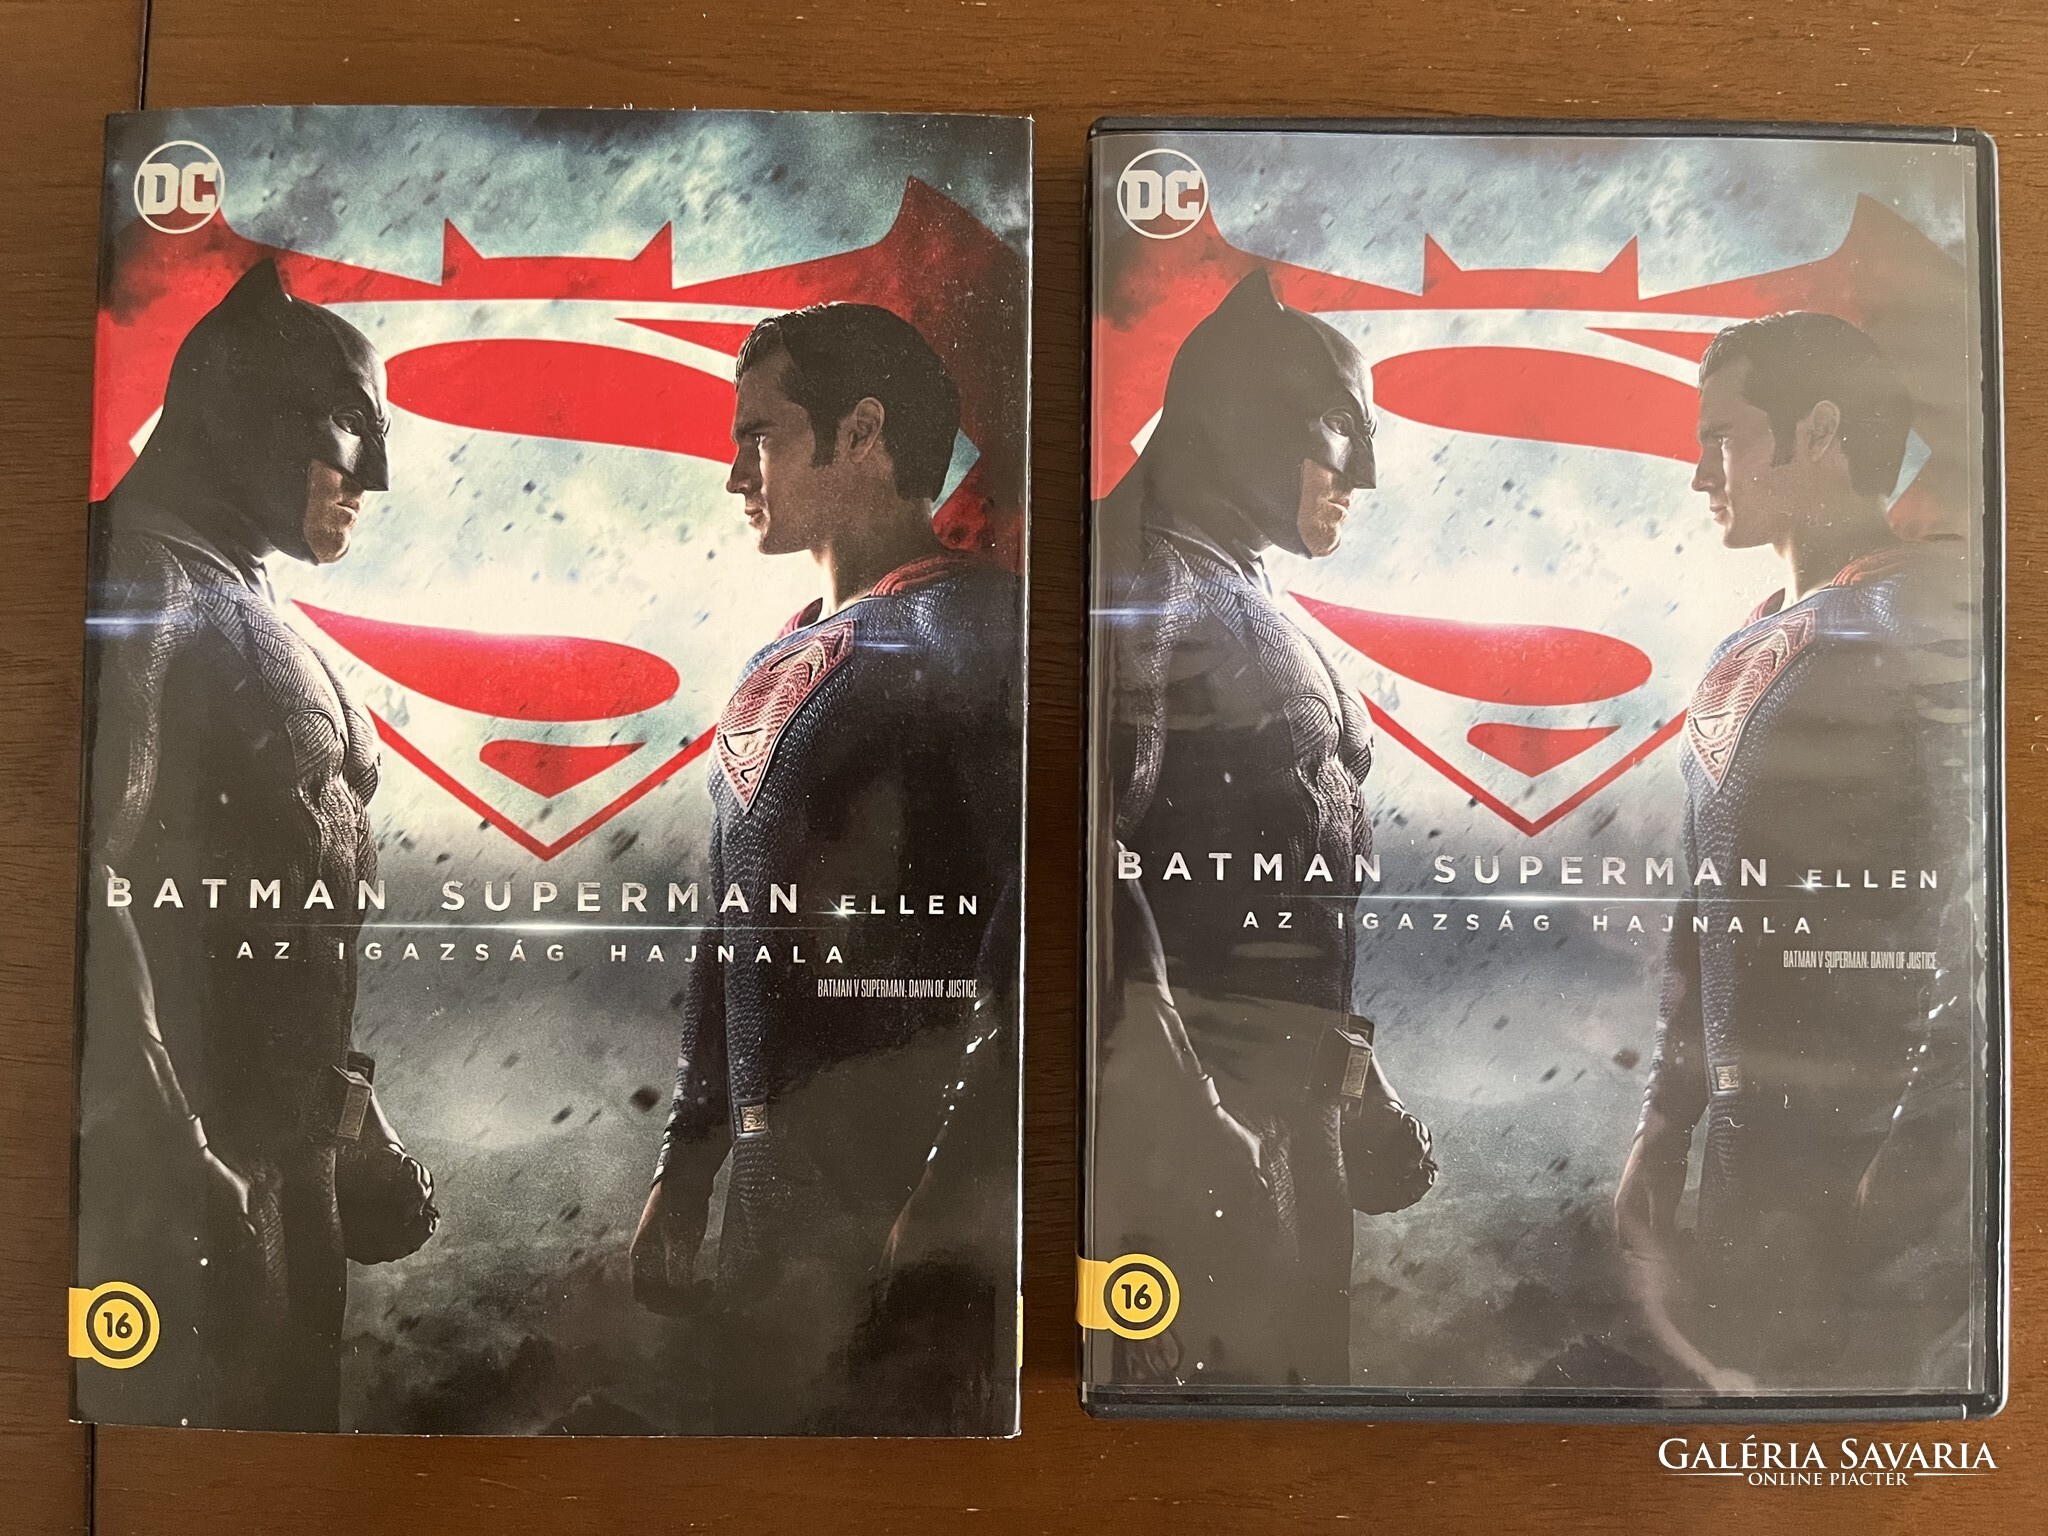 Batman v superman gift box dvd - Other antiques | Galeria Savaria online  marketplace - Buy or sell on a credible, high quality platform.